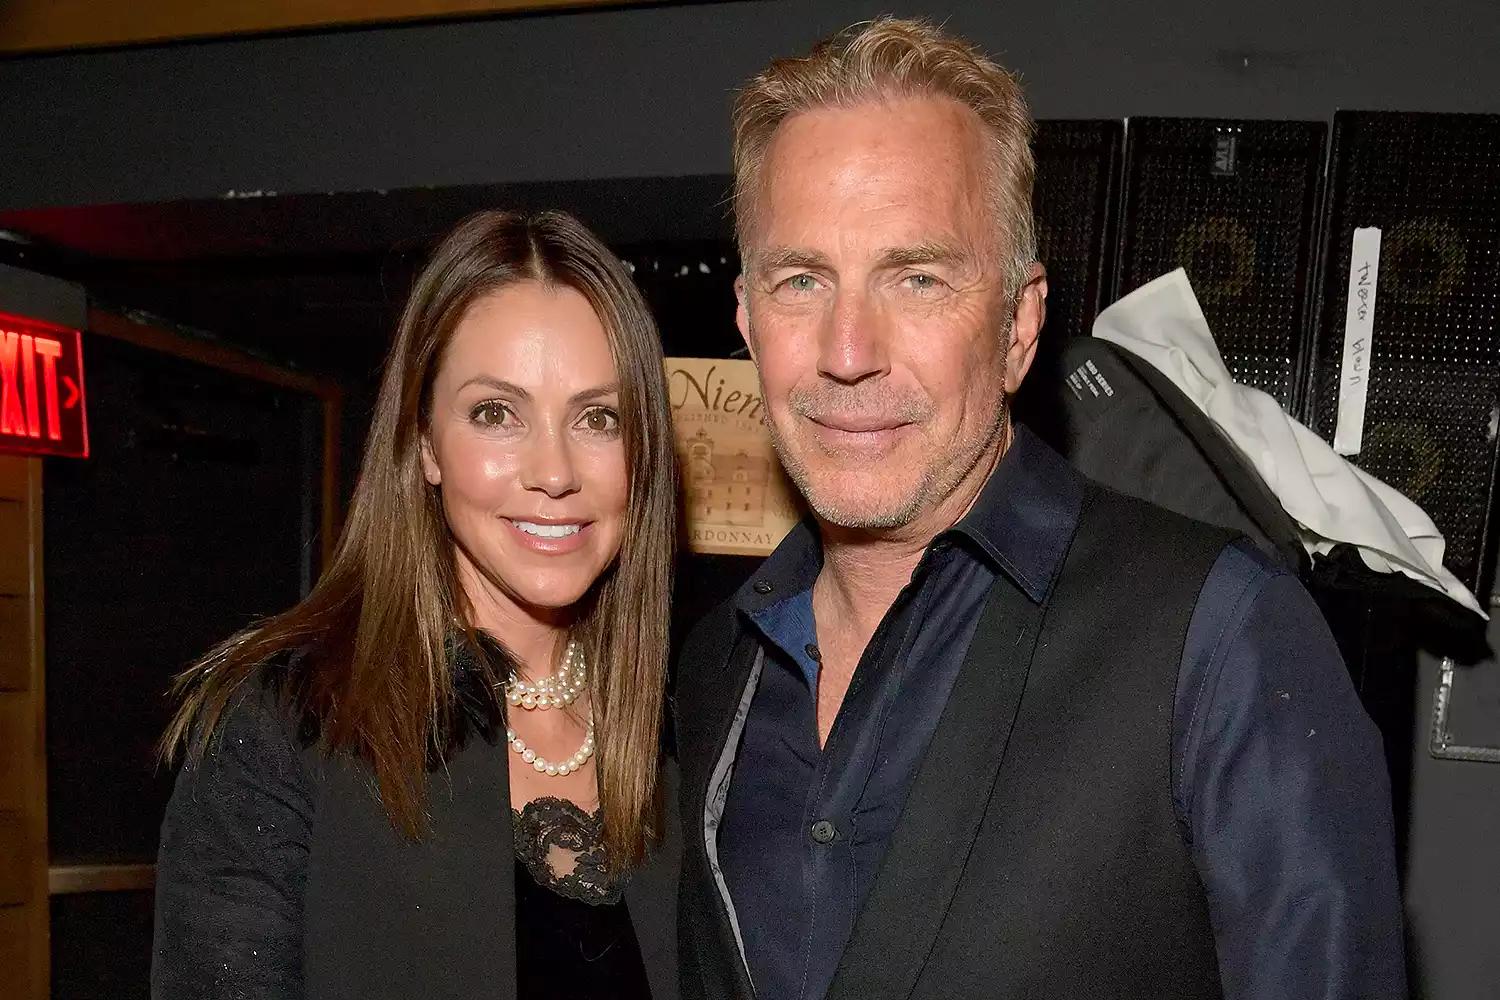 Inside Kevin Costner's Emotional Child Support Battle: What the Judge Really Thought